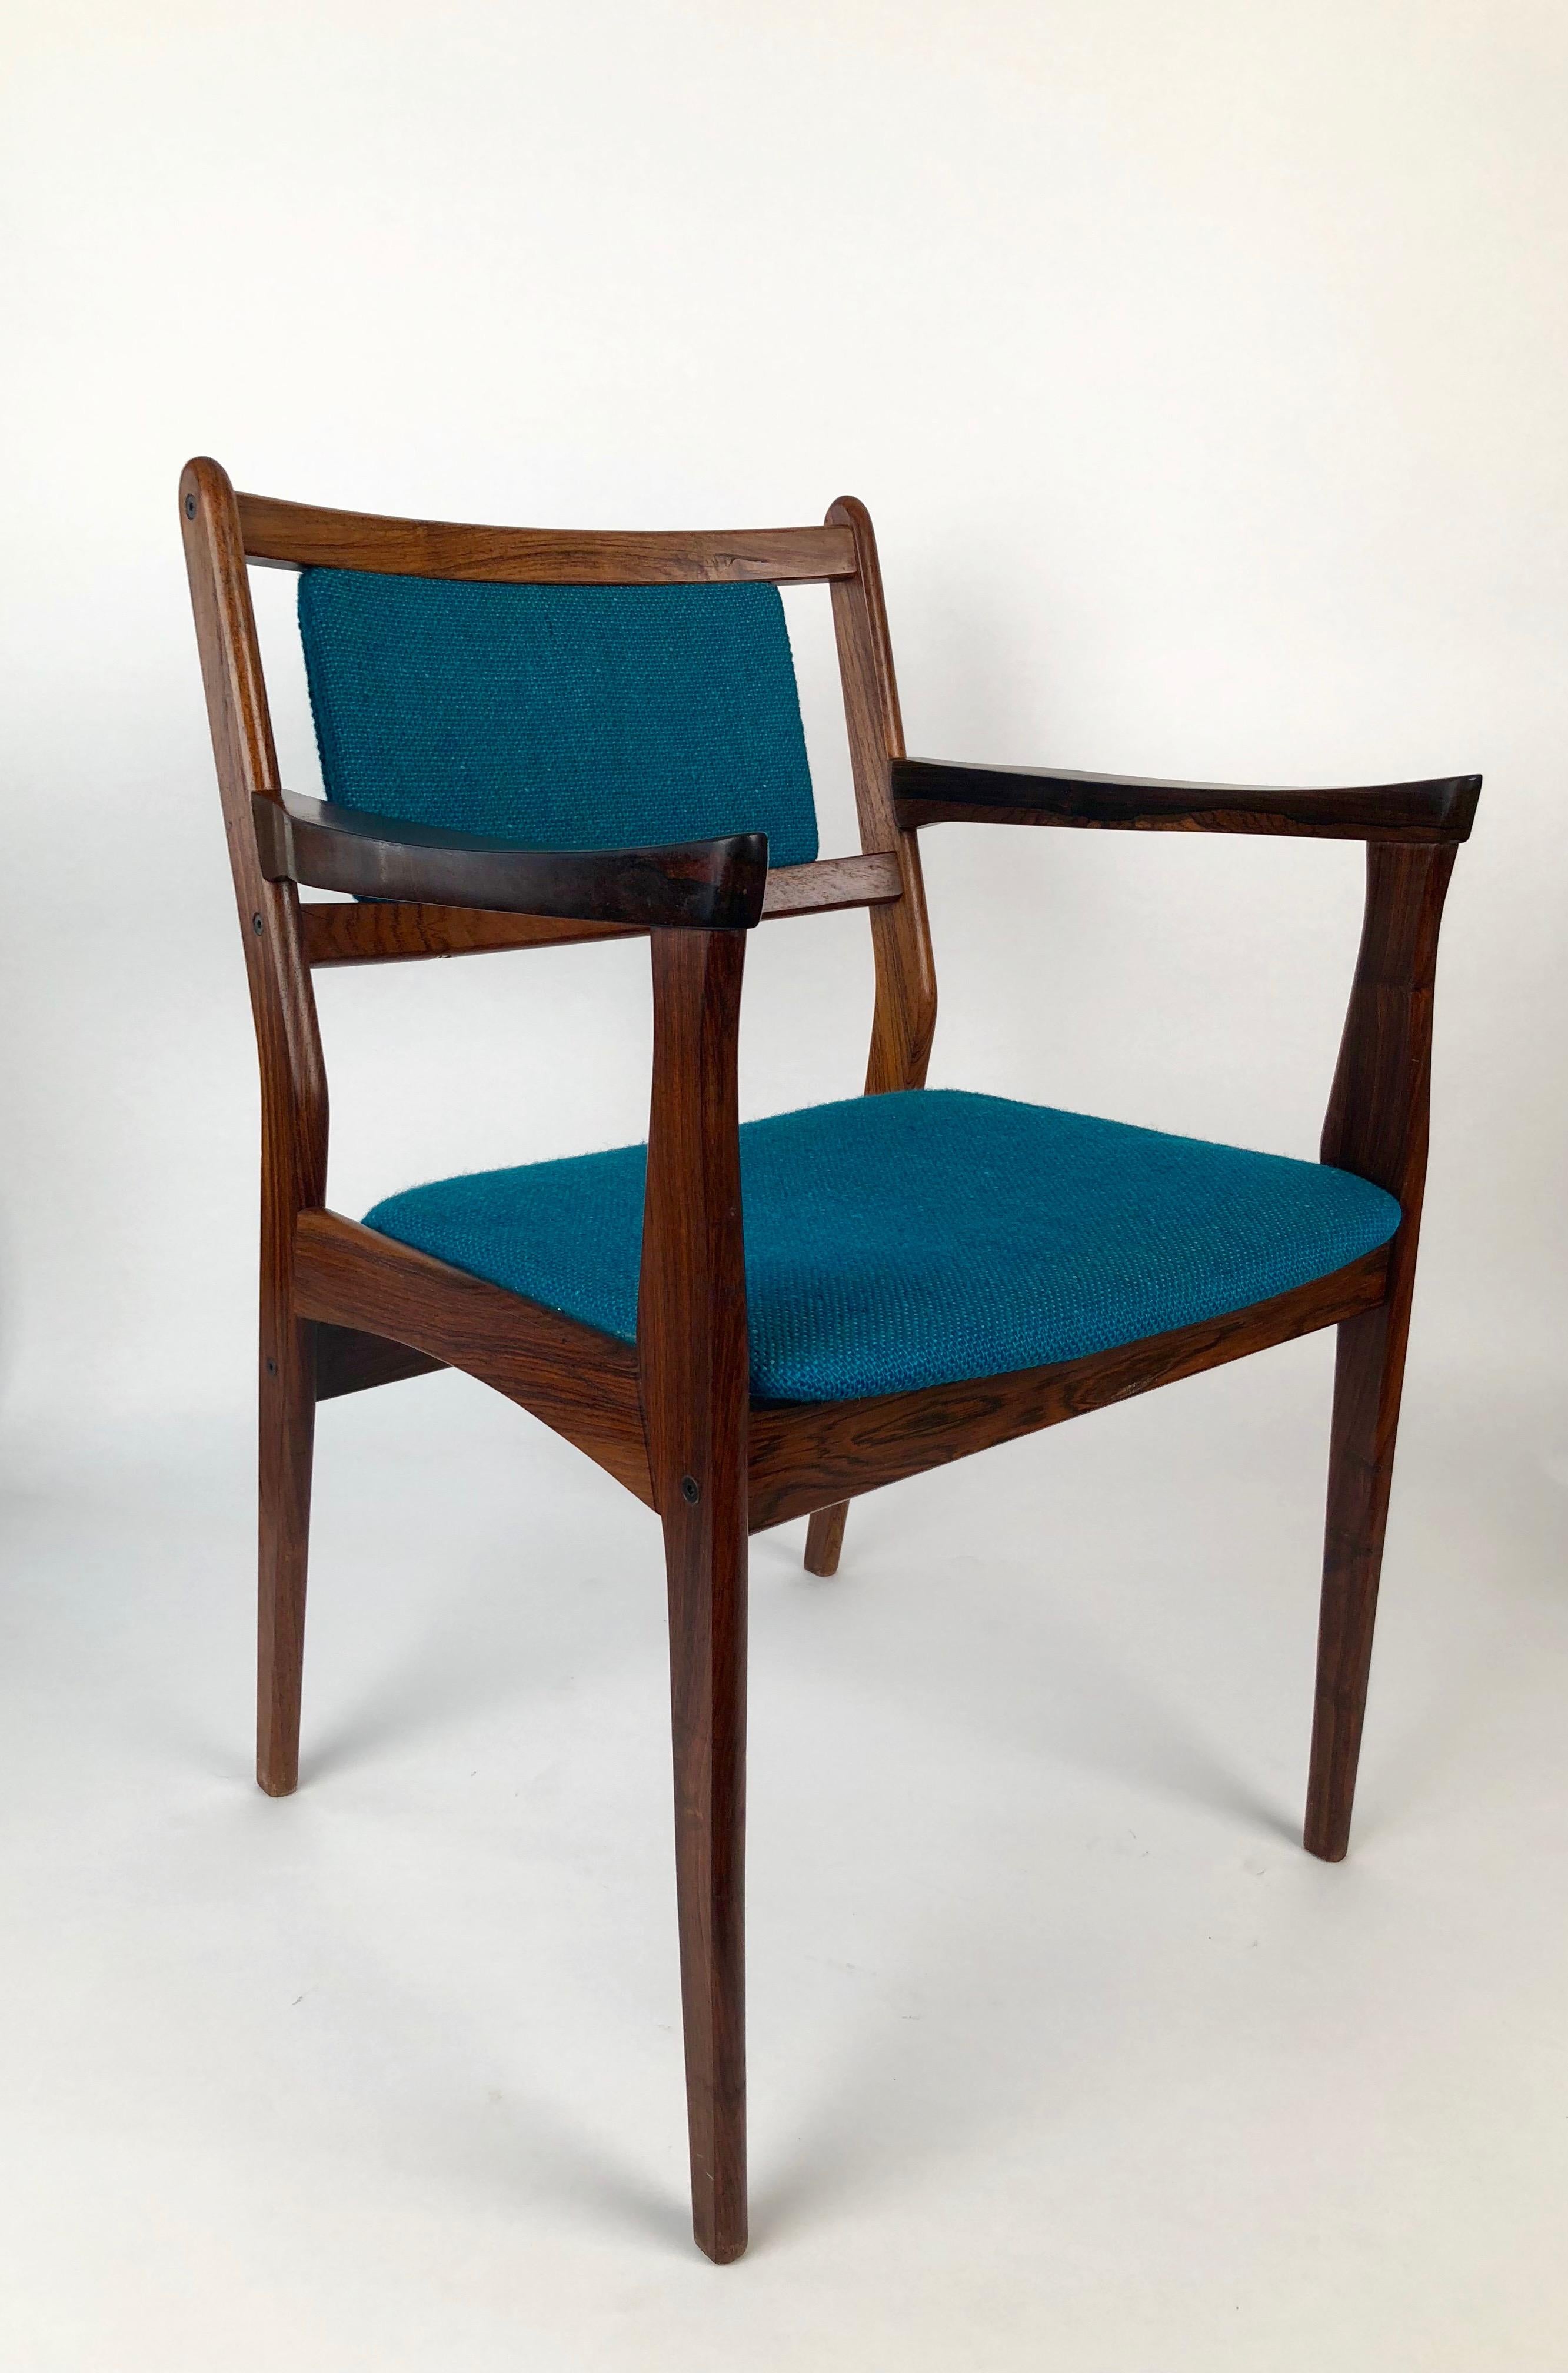 Set of Two Palisander Chairs with Turquoise Fabric from the 1960s For Sale 1